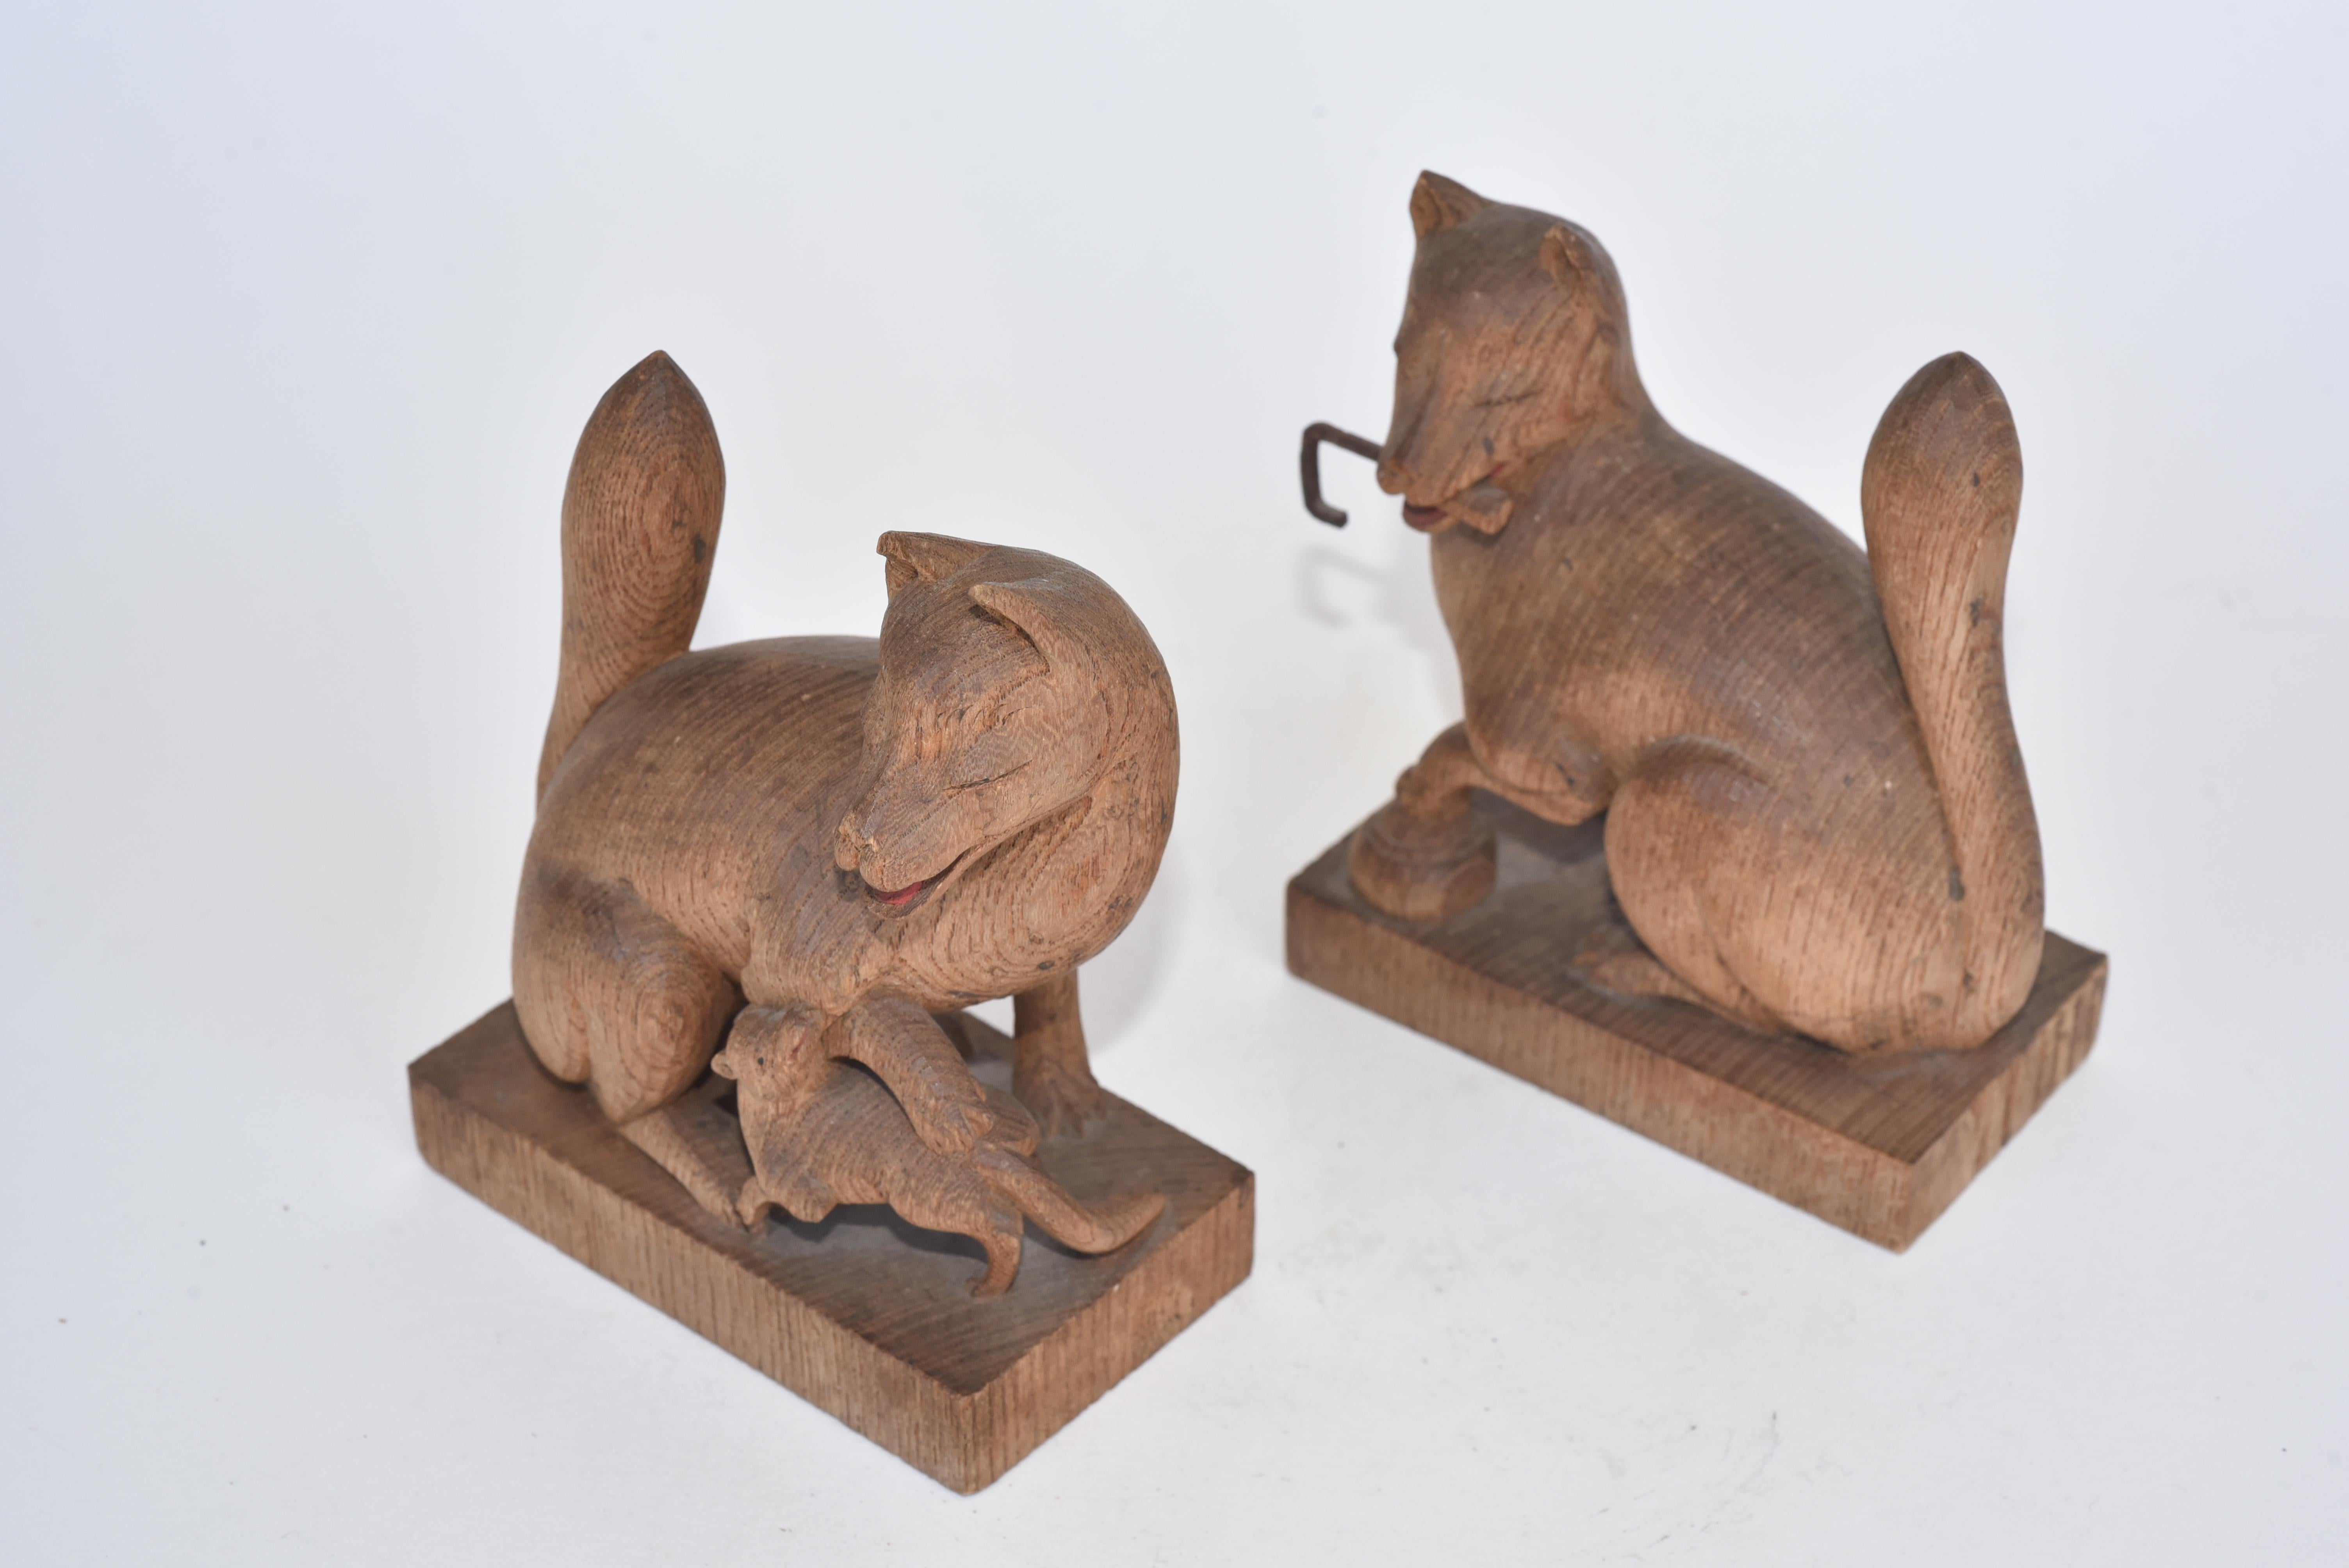 Pair of Japanese carved miniature wooden foxes (Kitsune)), Inari Shrine Guardians, 19th century.


Foxes play an important role in Japanese folk culture and religion. Foxes, regarded as messengers, are found in Inari shrines and often have a kura